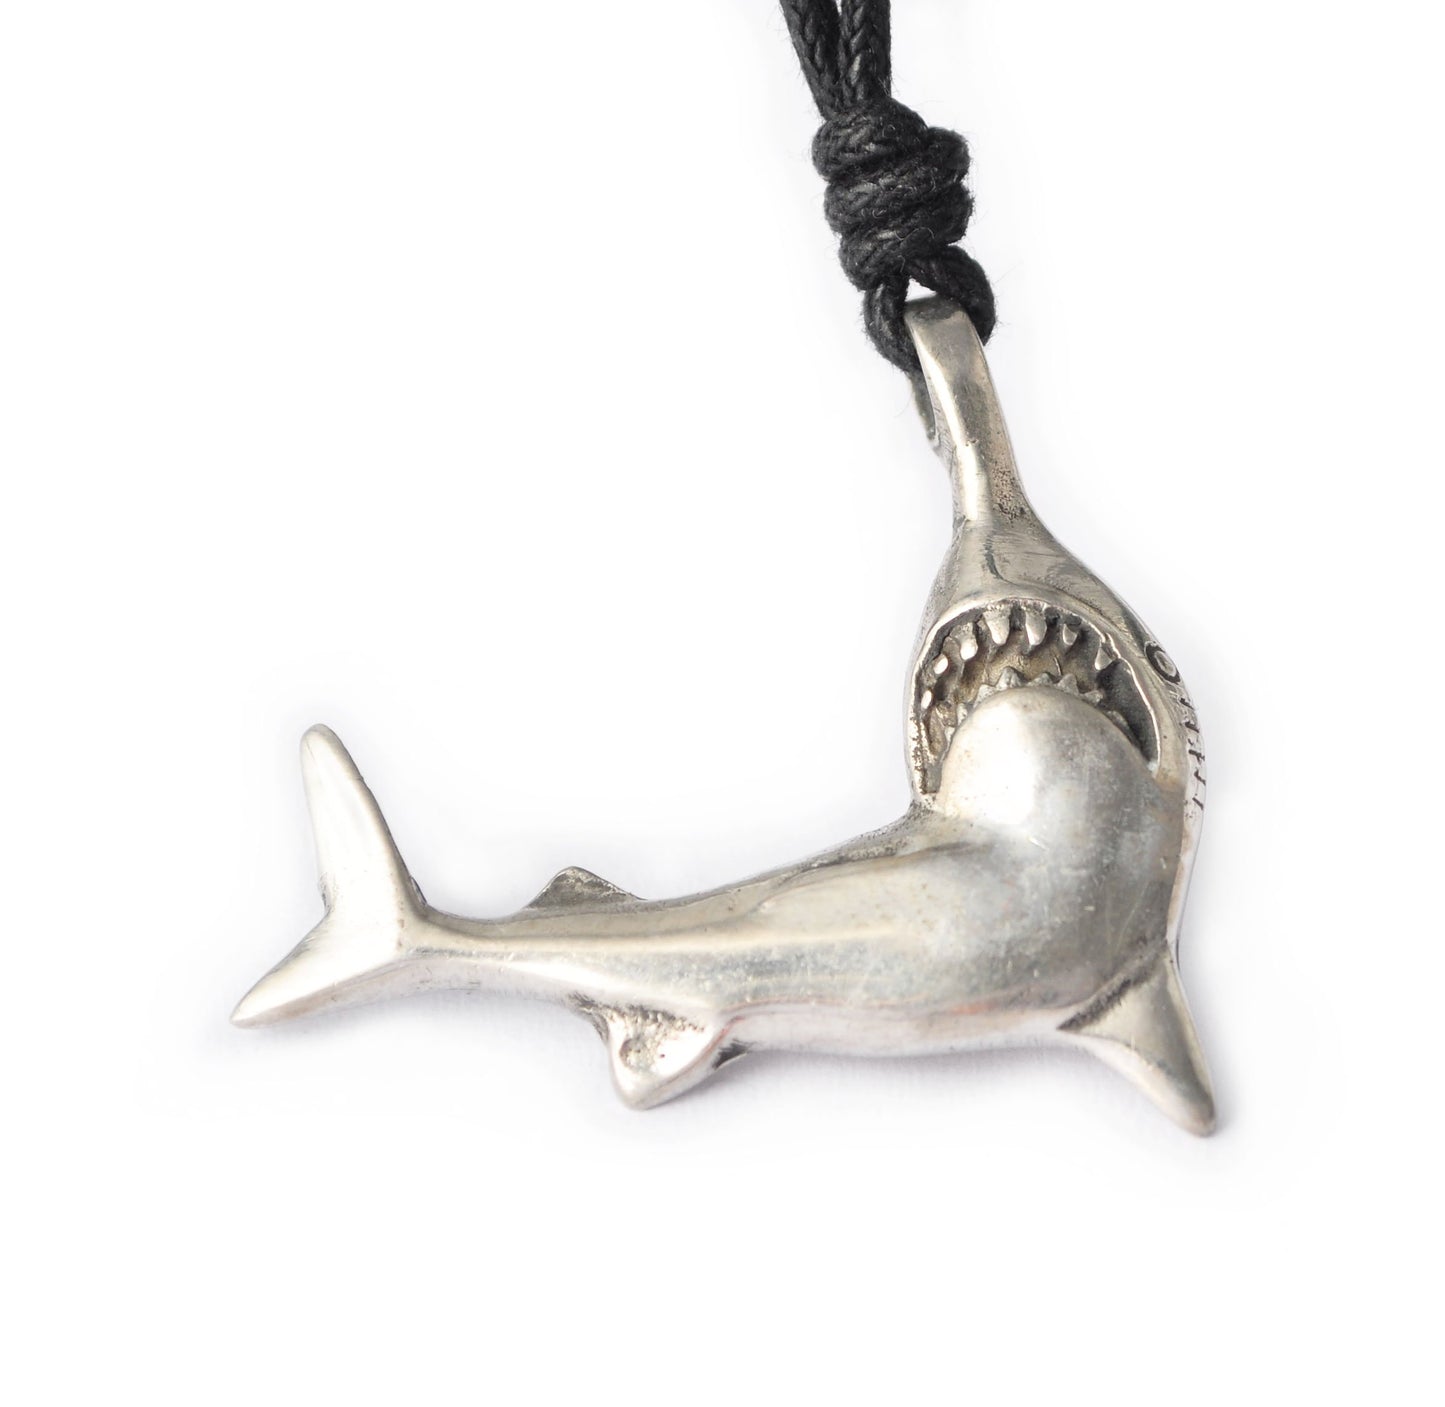 New Shark Silver Pewter Charm Necklace Pendant Jewelry